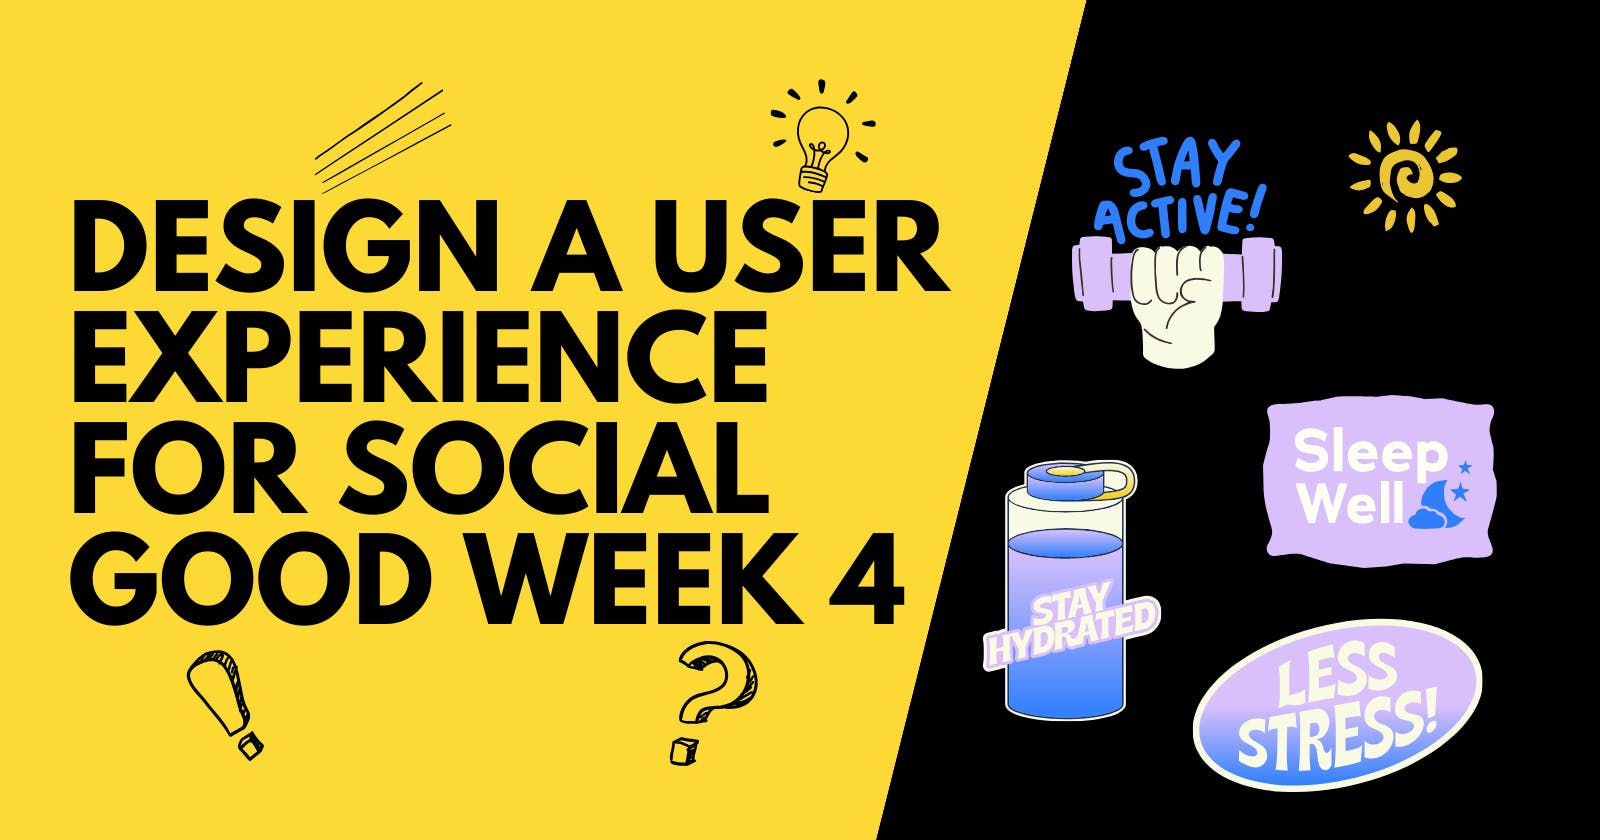 Design a User Experience for Social Good & Prepare for Jobs Course Journey Week 4